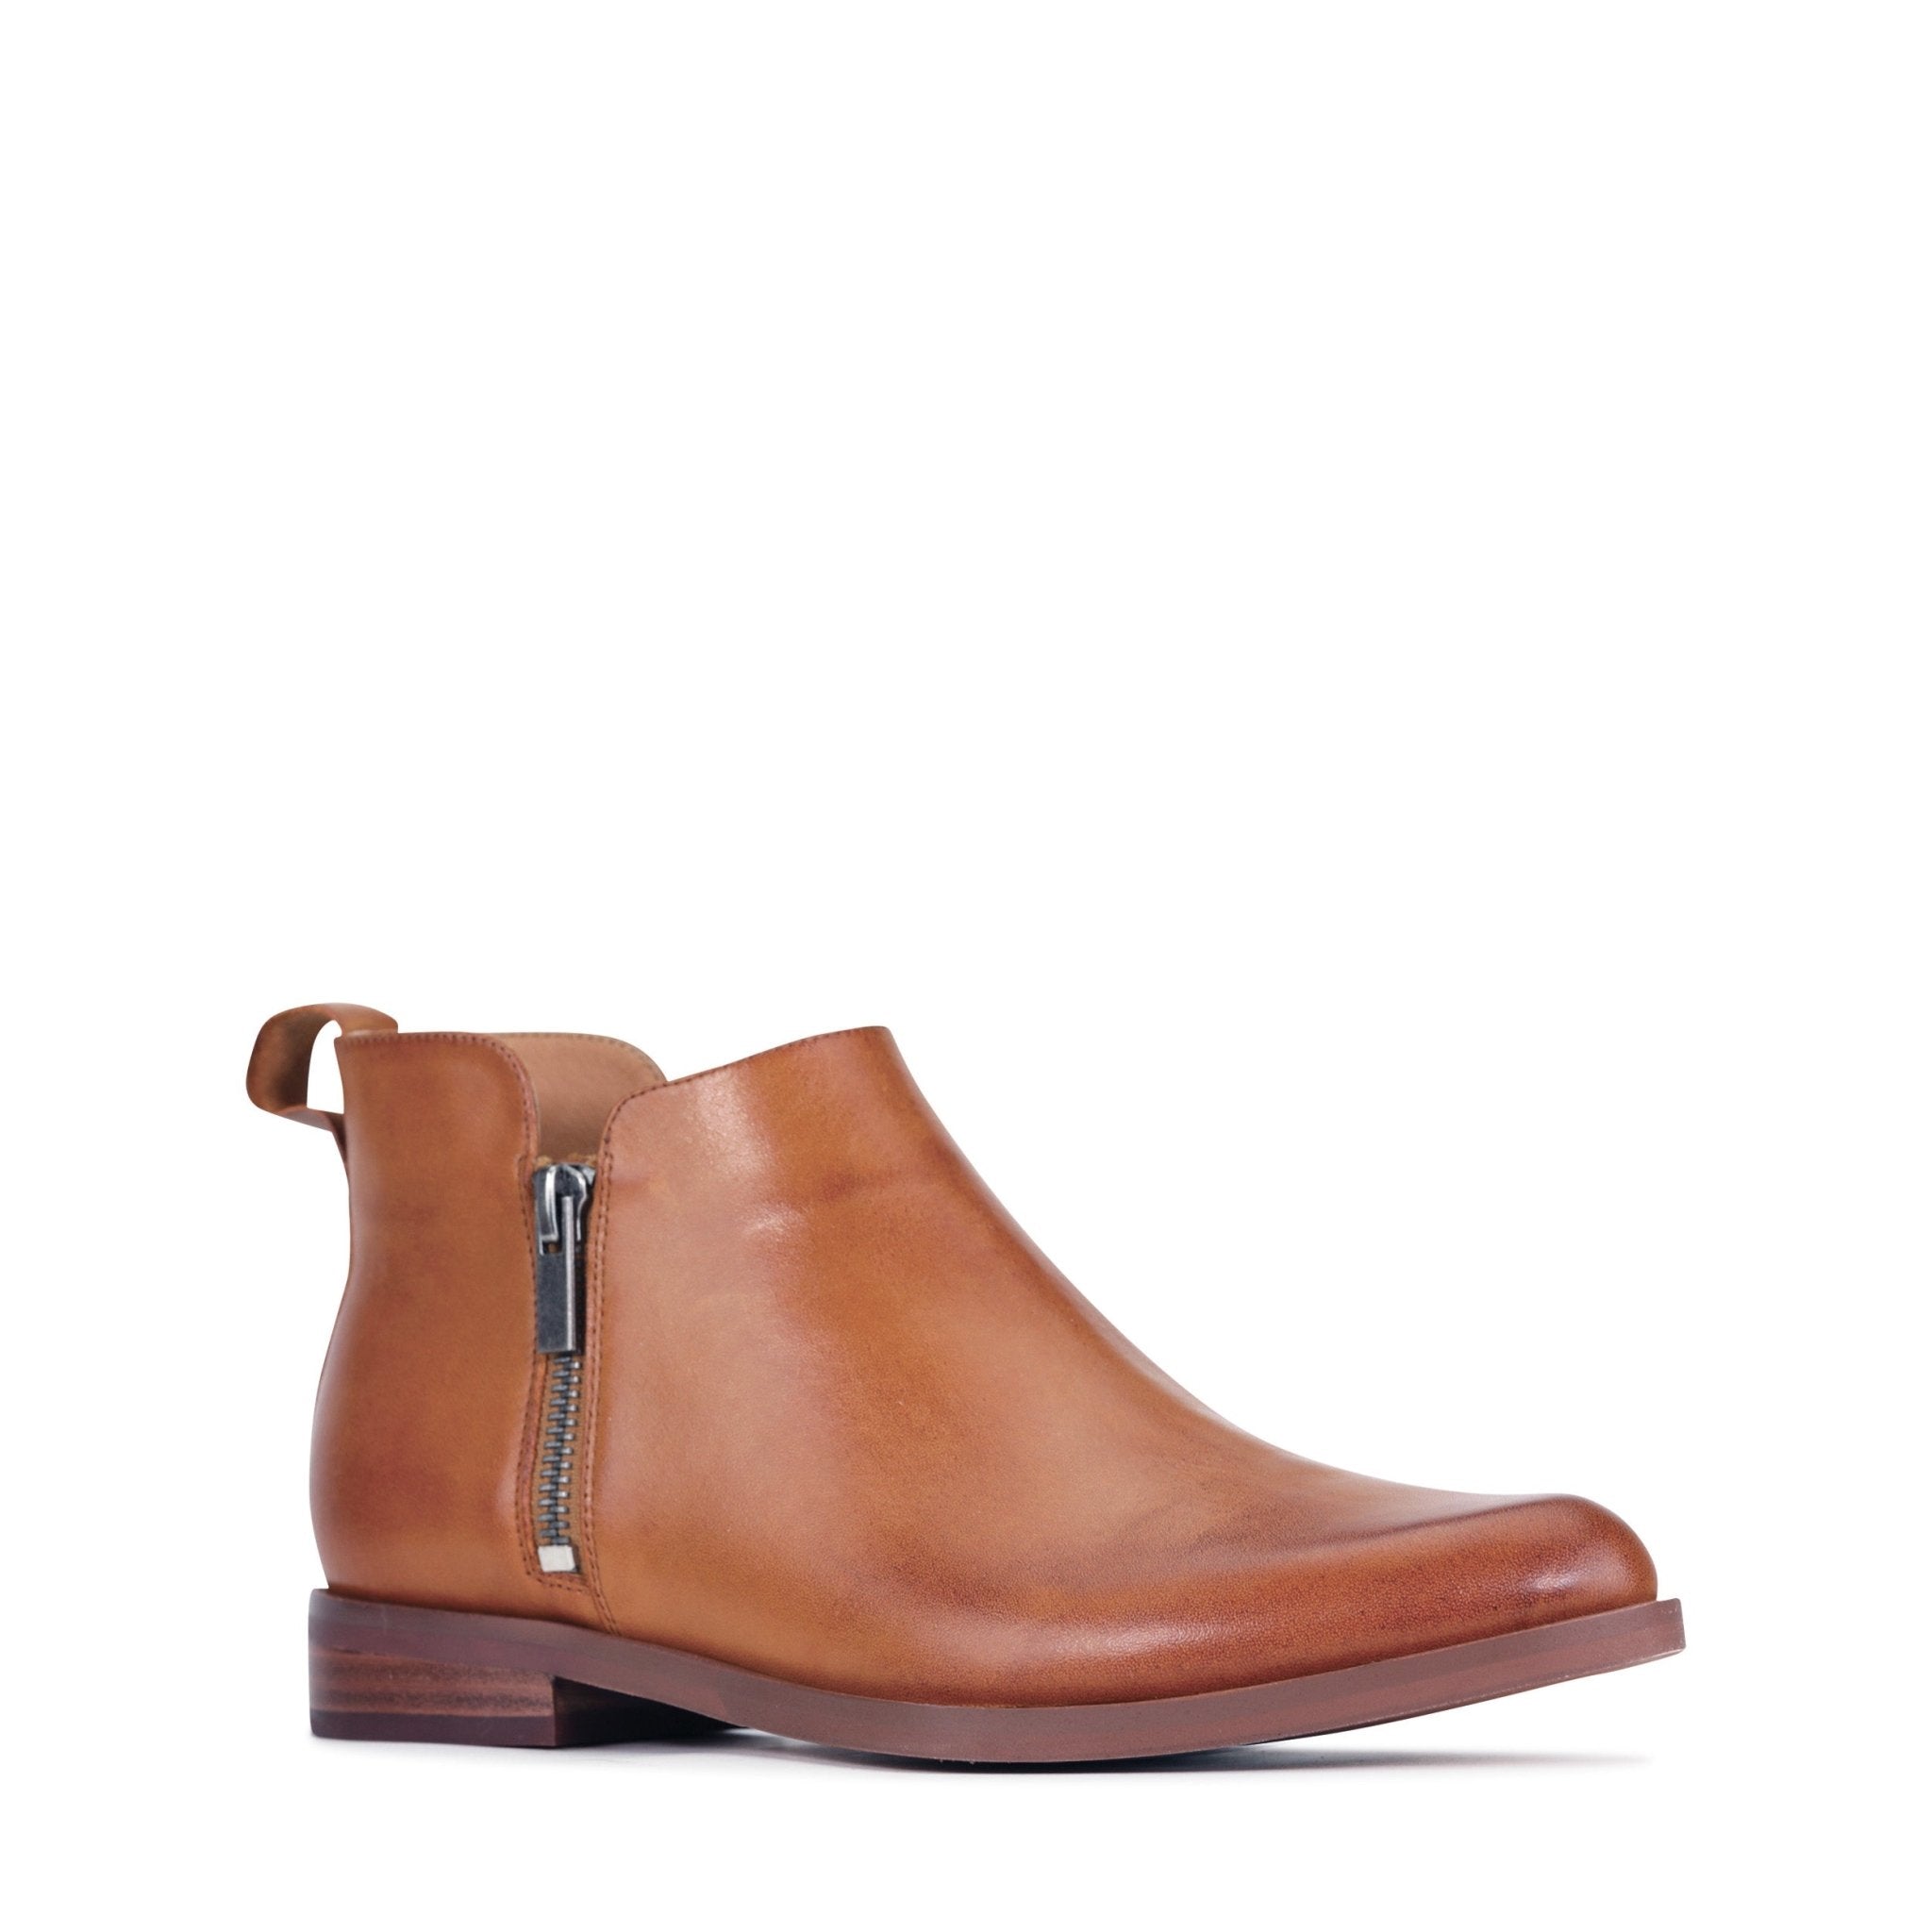 ZARINA - EOS Footwear - Ankle Boots #color_brandy